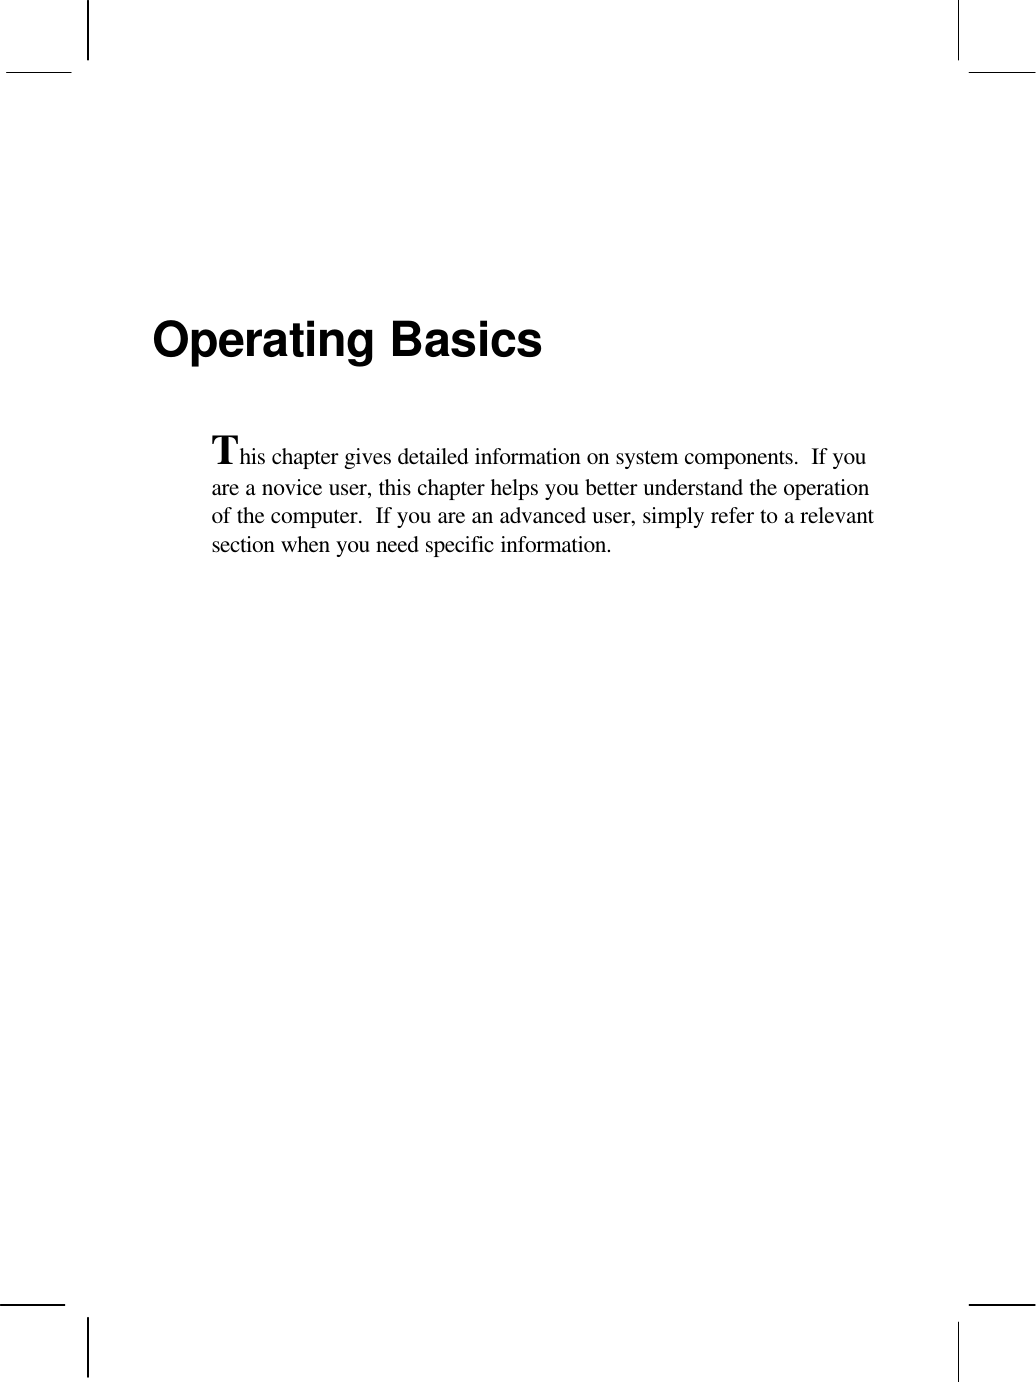 Operating BasicsThis chapter gives detailed information on system components.  If youare a novice user, this chapter helps you better understand the operationof the computer.  If you are an advanced user, simply refer to a relevantsection when you need specific information.